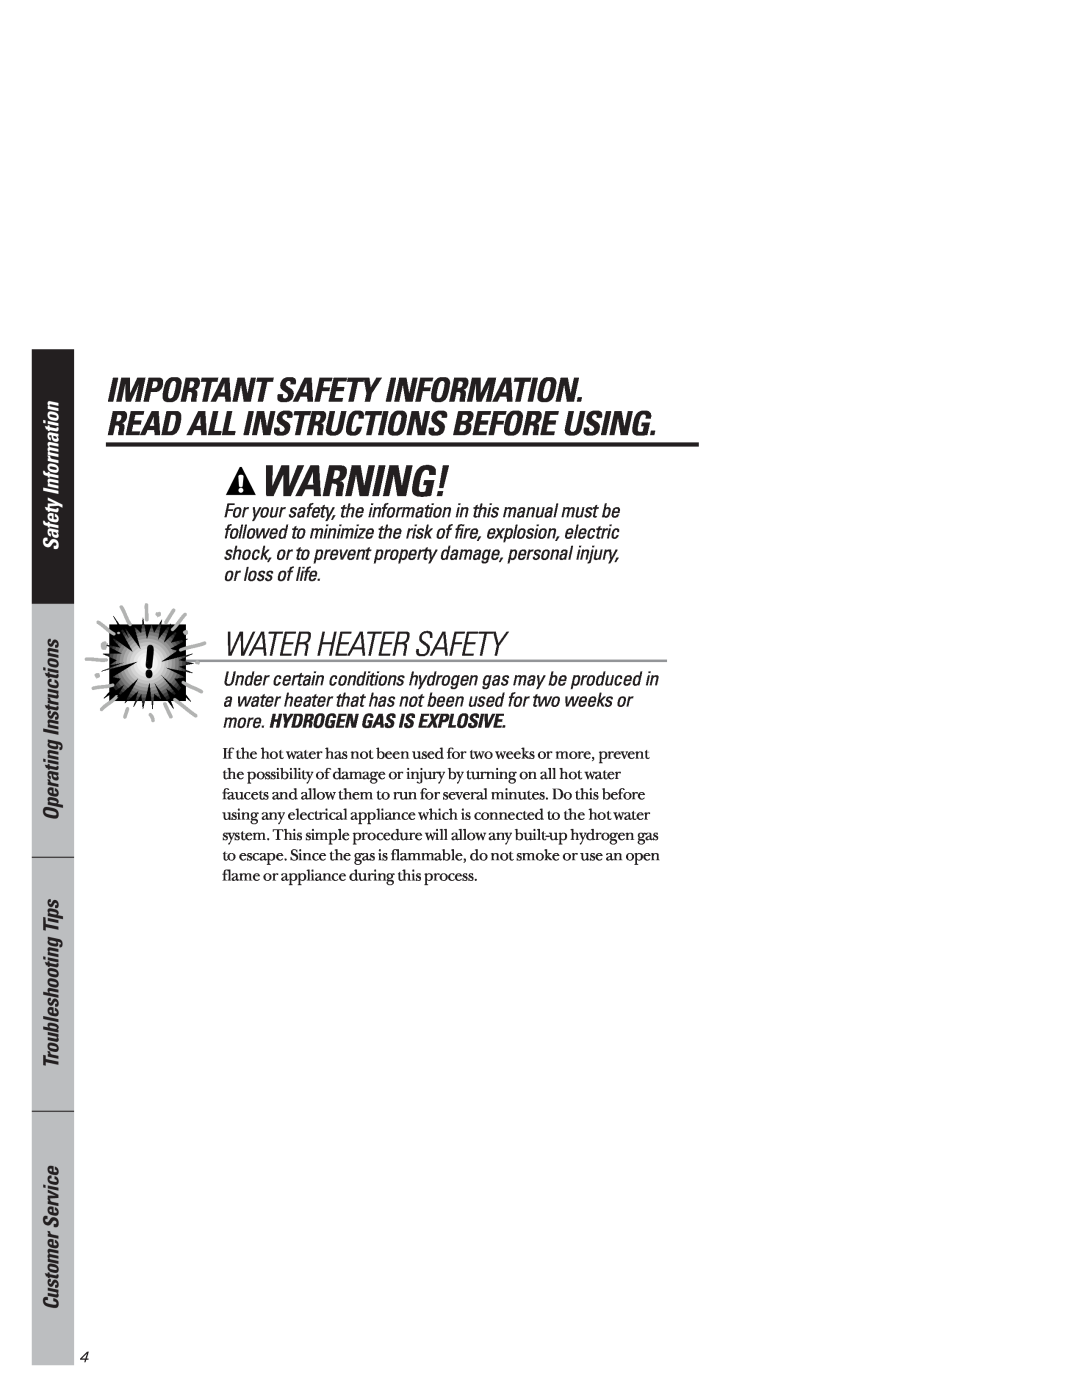 GE GSD3230, GSD3220, GSD2230, GSD3210 Water Heater Safety, Important Safety Information. Read All Instructions Before Using 